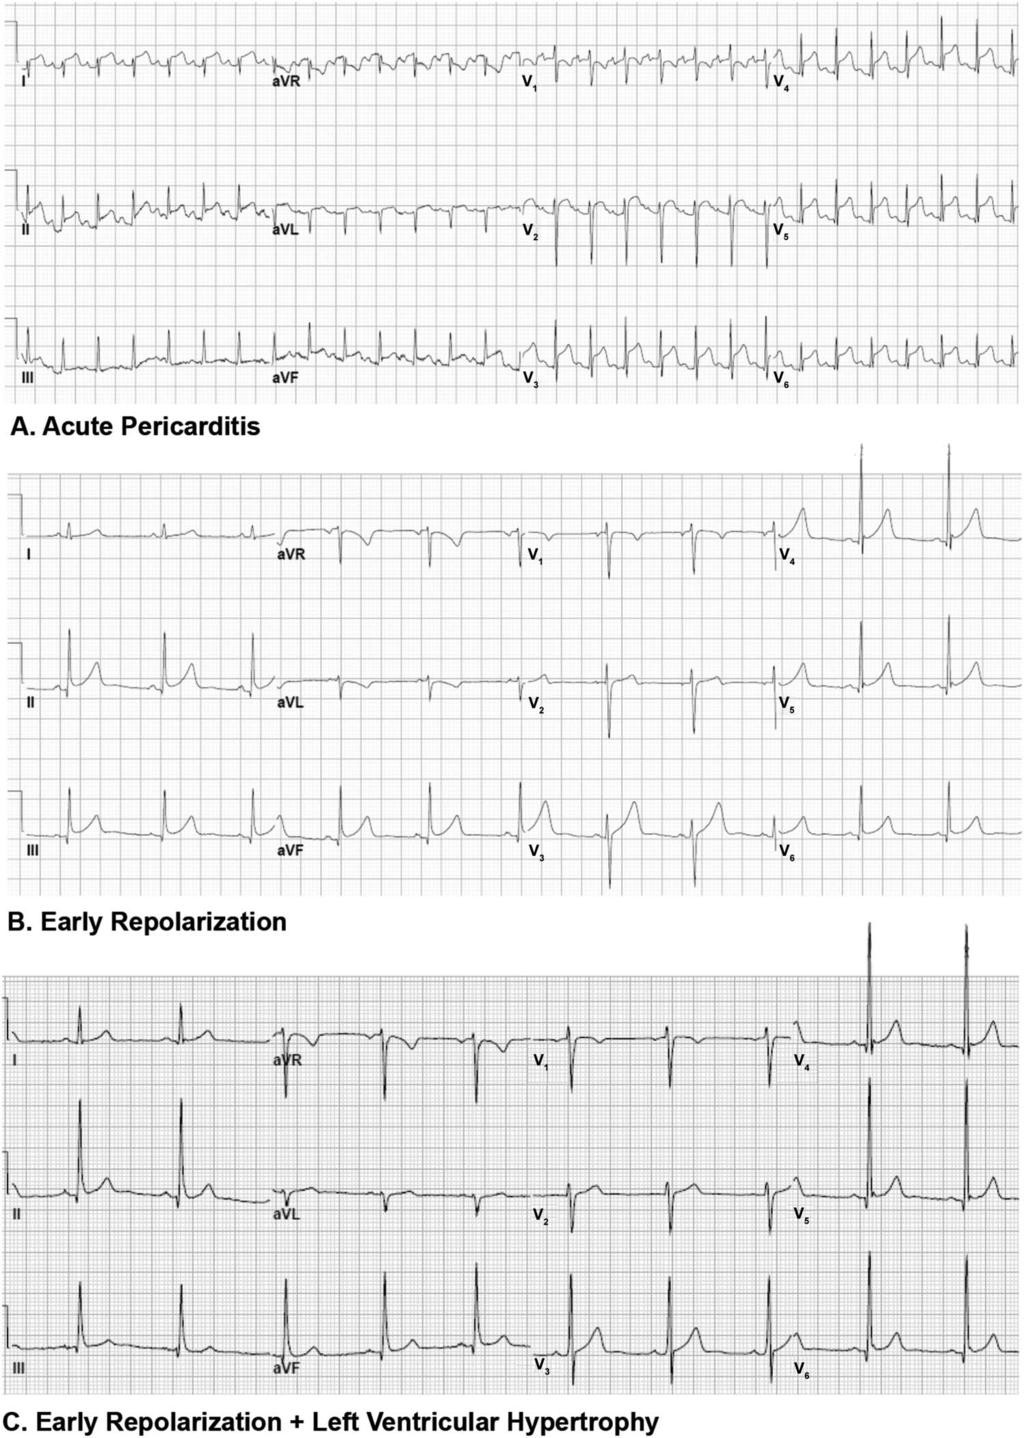 ST/T Ratio in AP, ER and ERLVH FIGURE 1. Electrocardiogram patterns of acute pericarditis (A), early repolarization (B) and early repolarization of left ventricular hypertrophy (C).